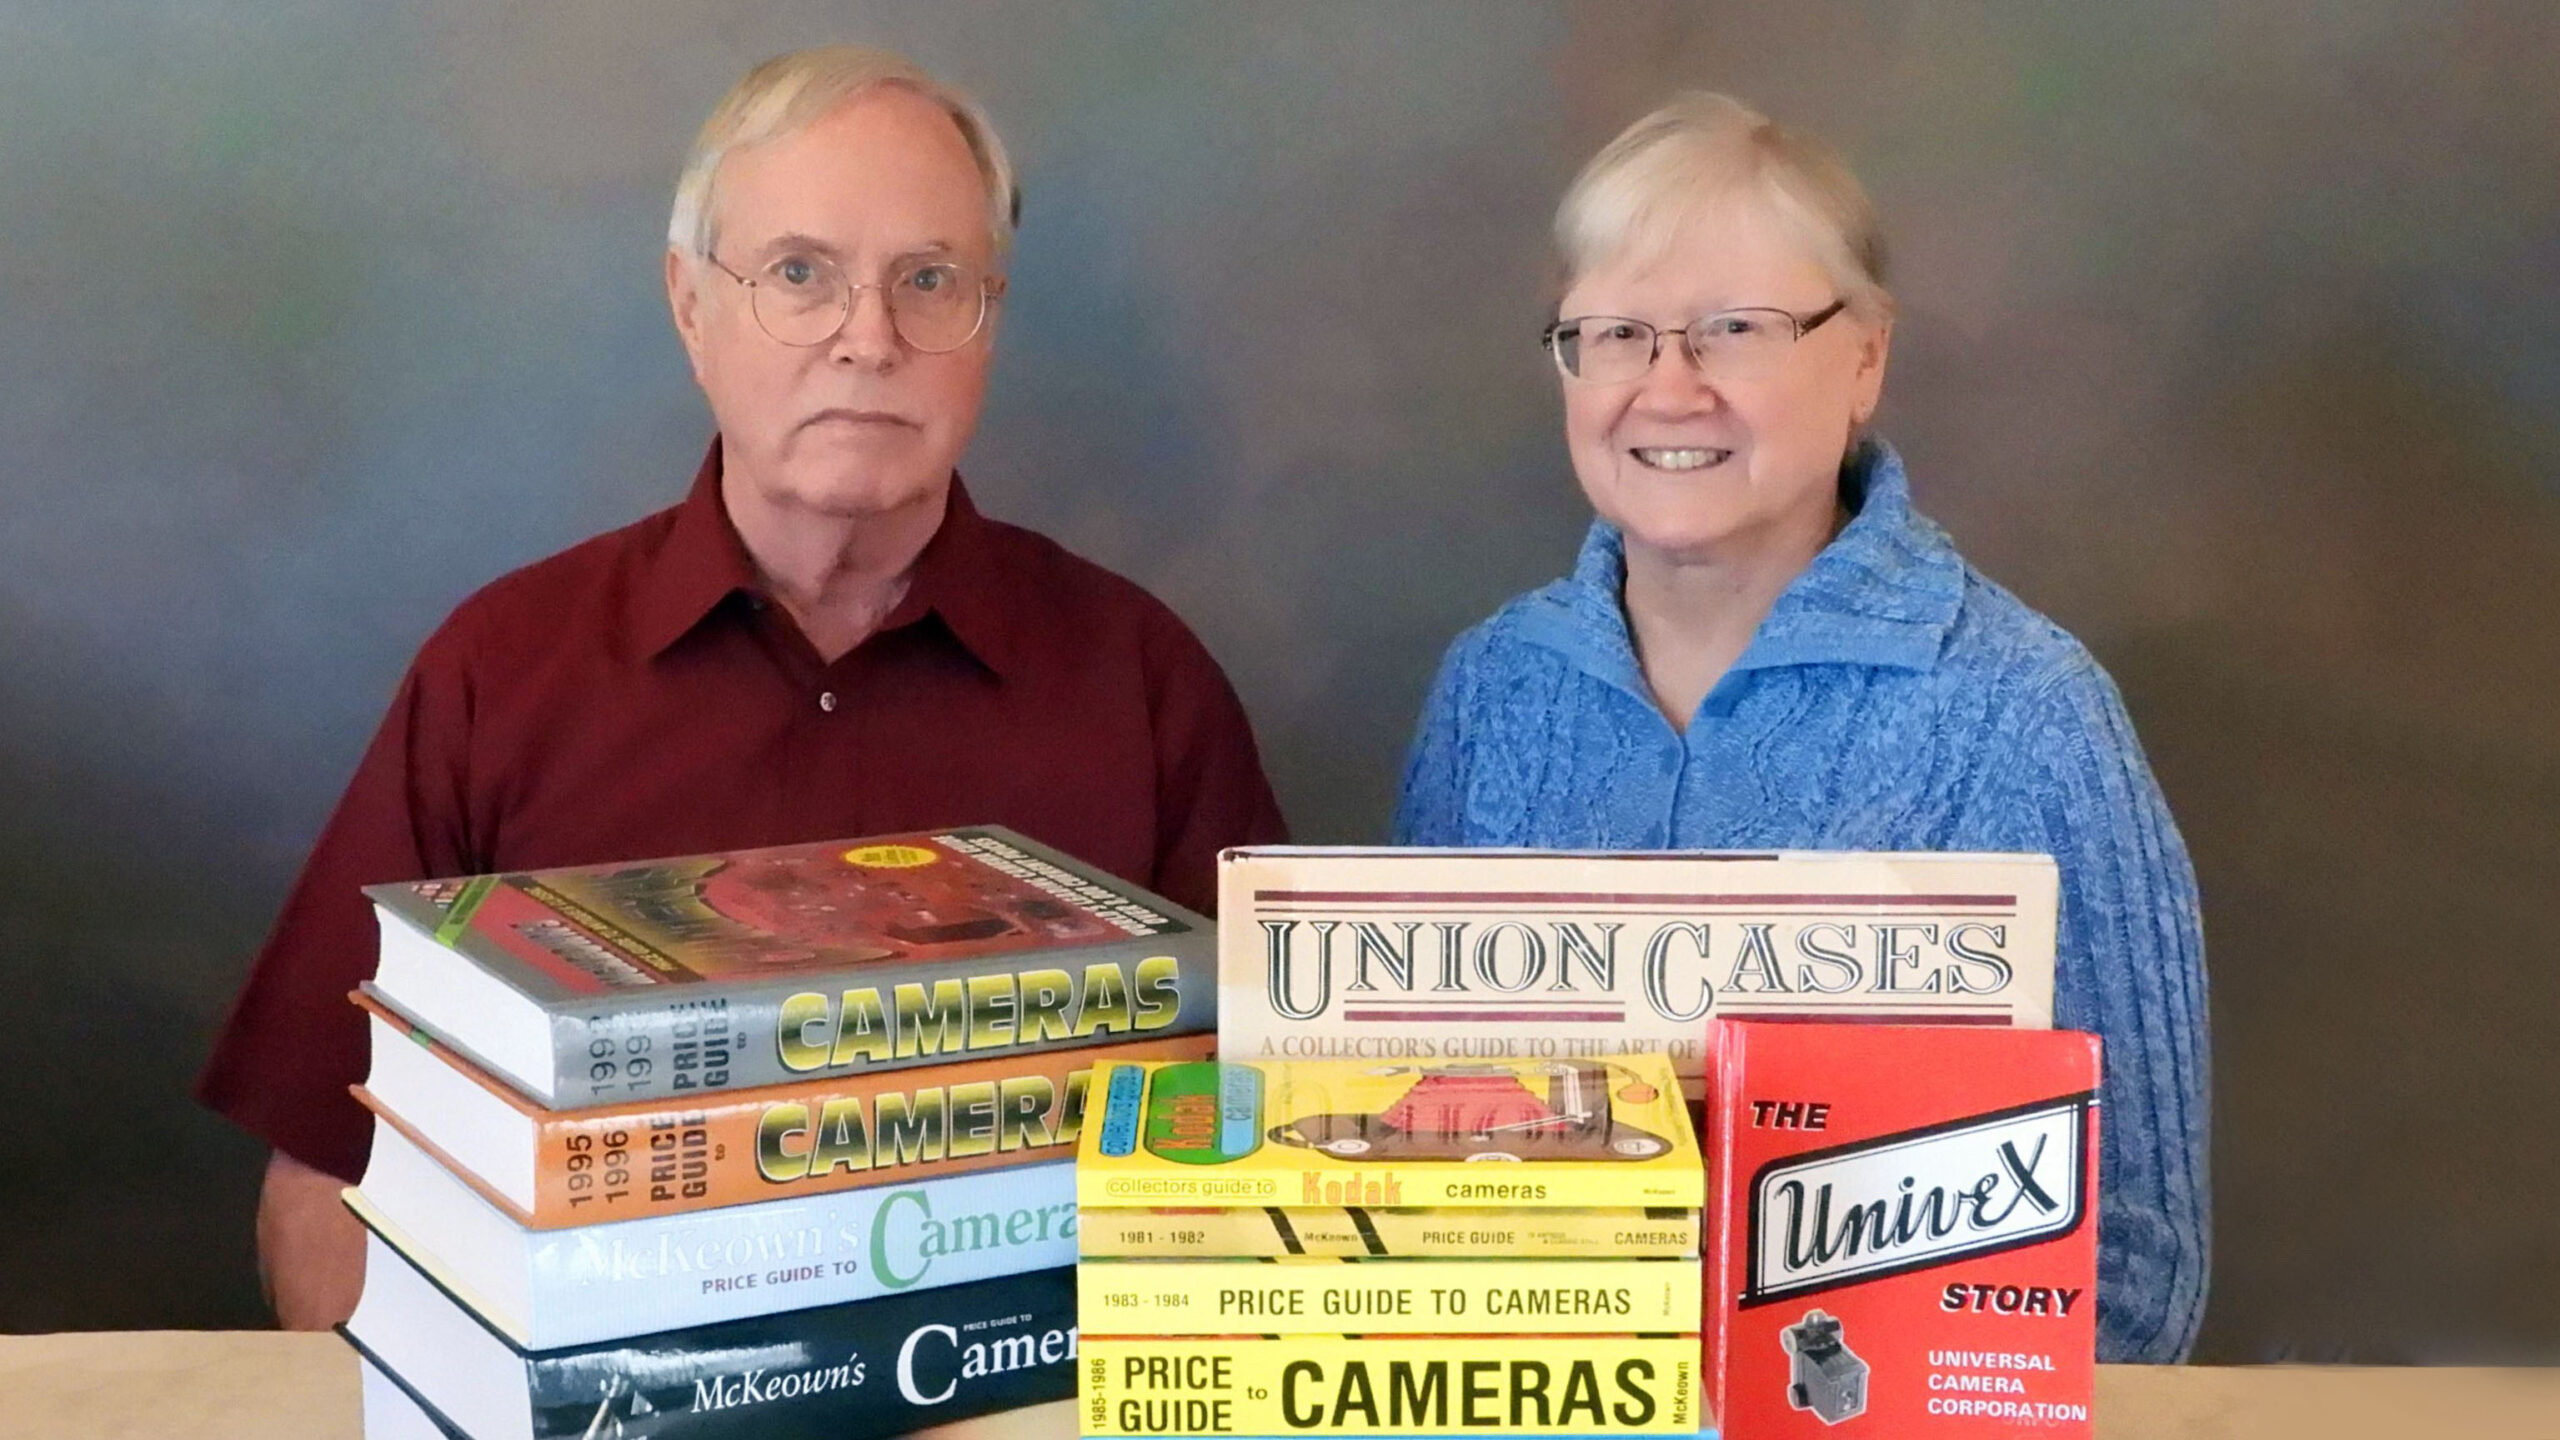 Jim and Joan McKeown pose with multiple books they've authored.